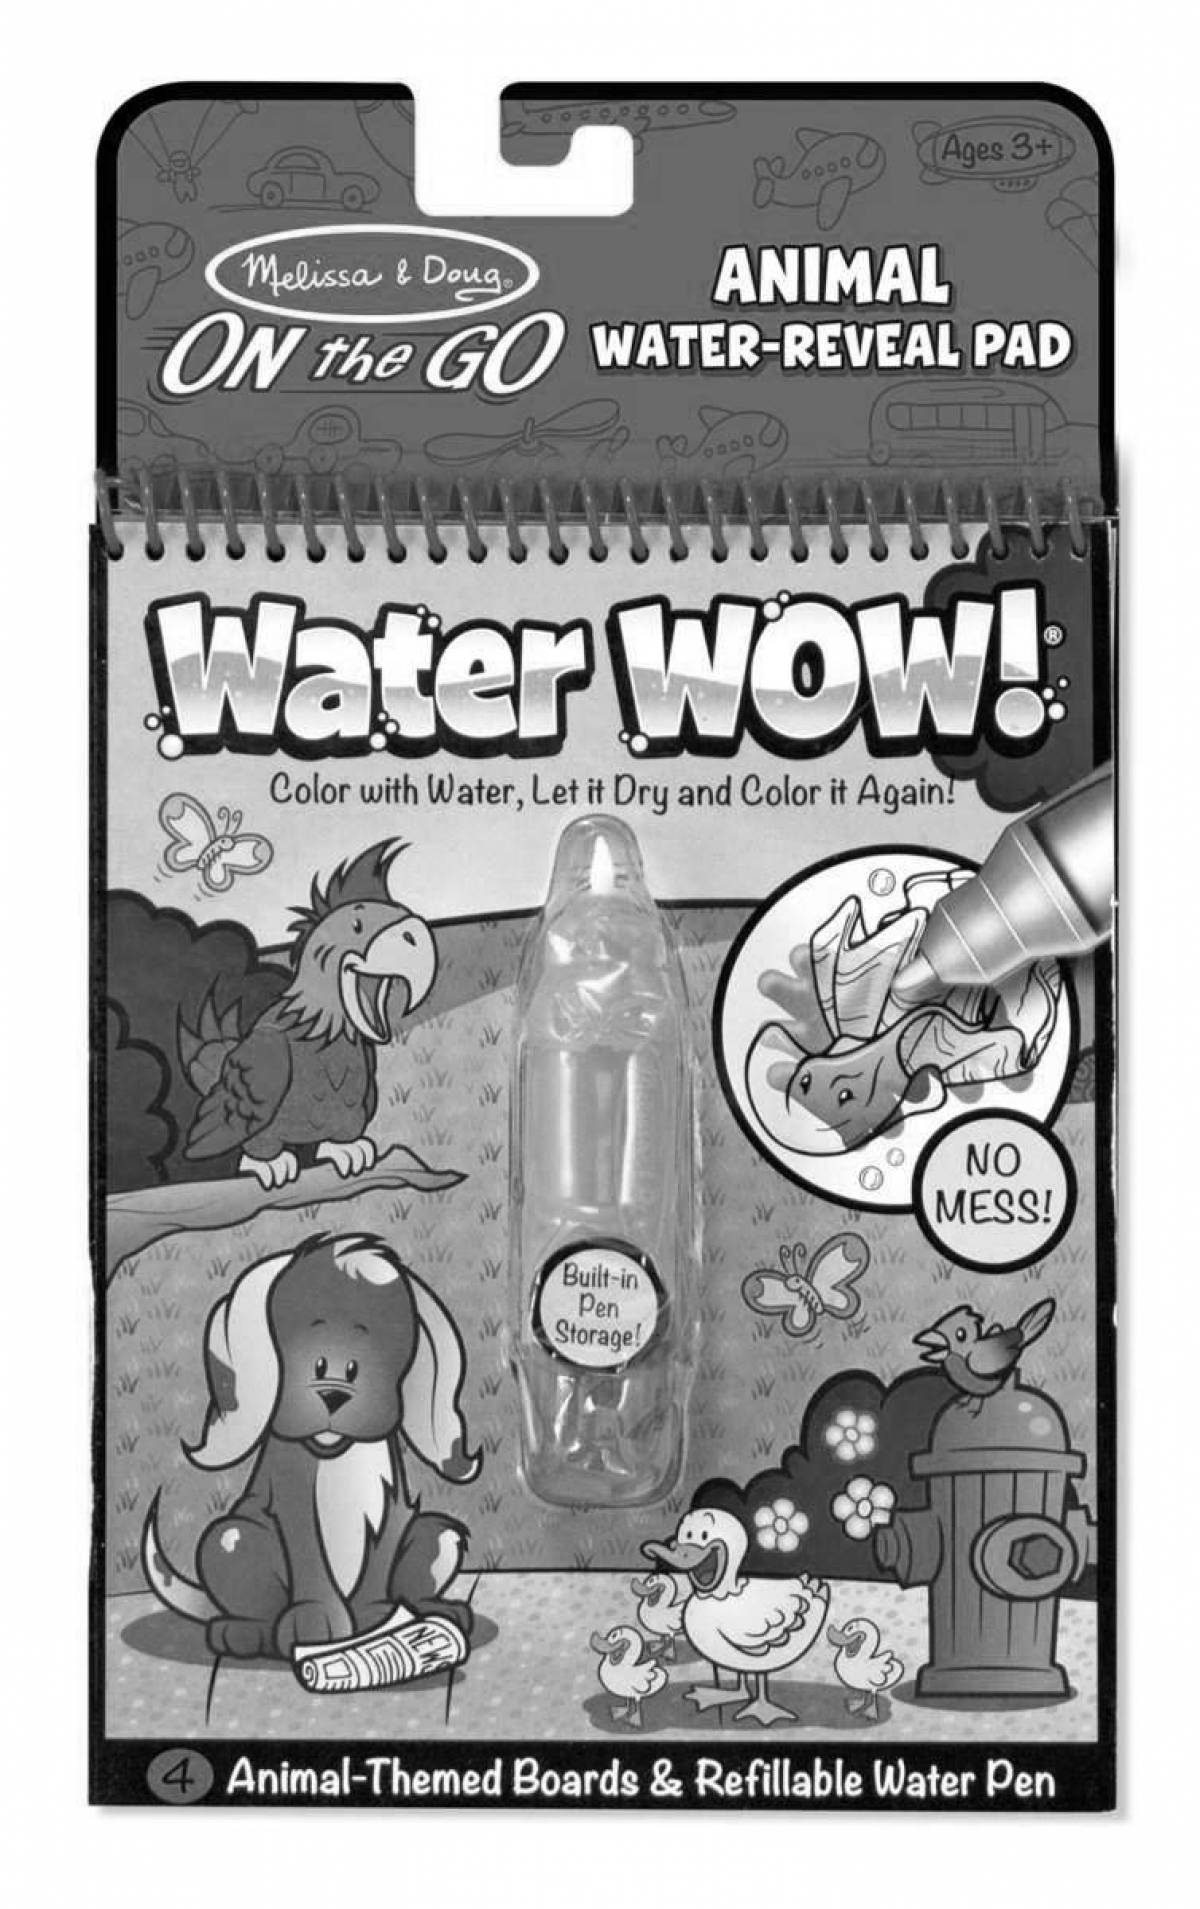 Amazing water wow coloring page